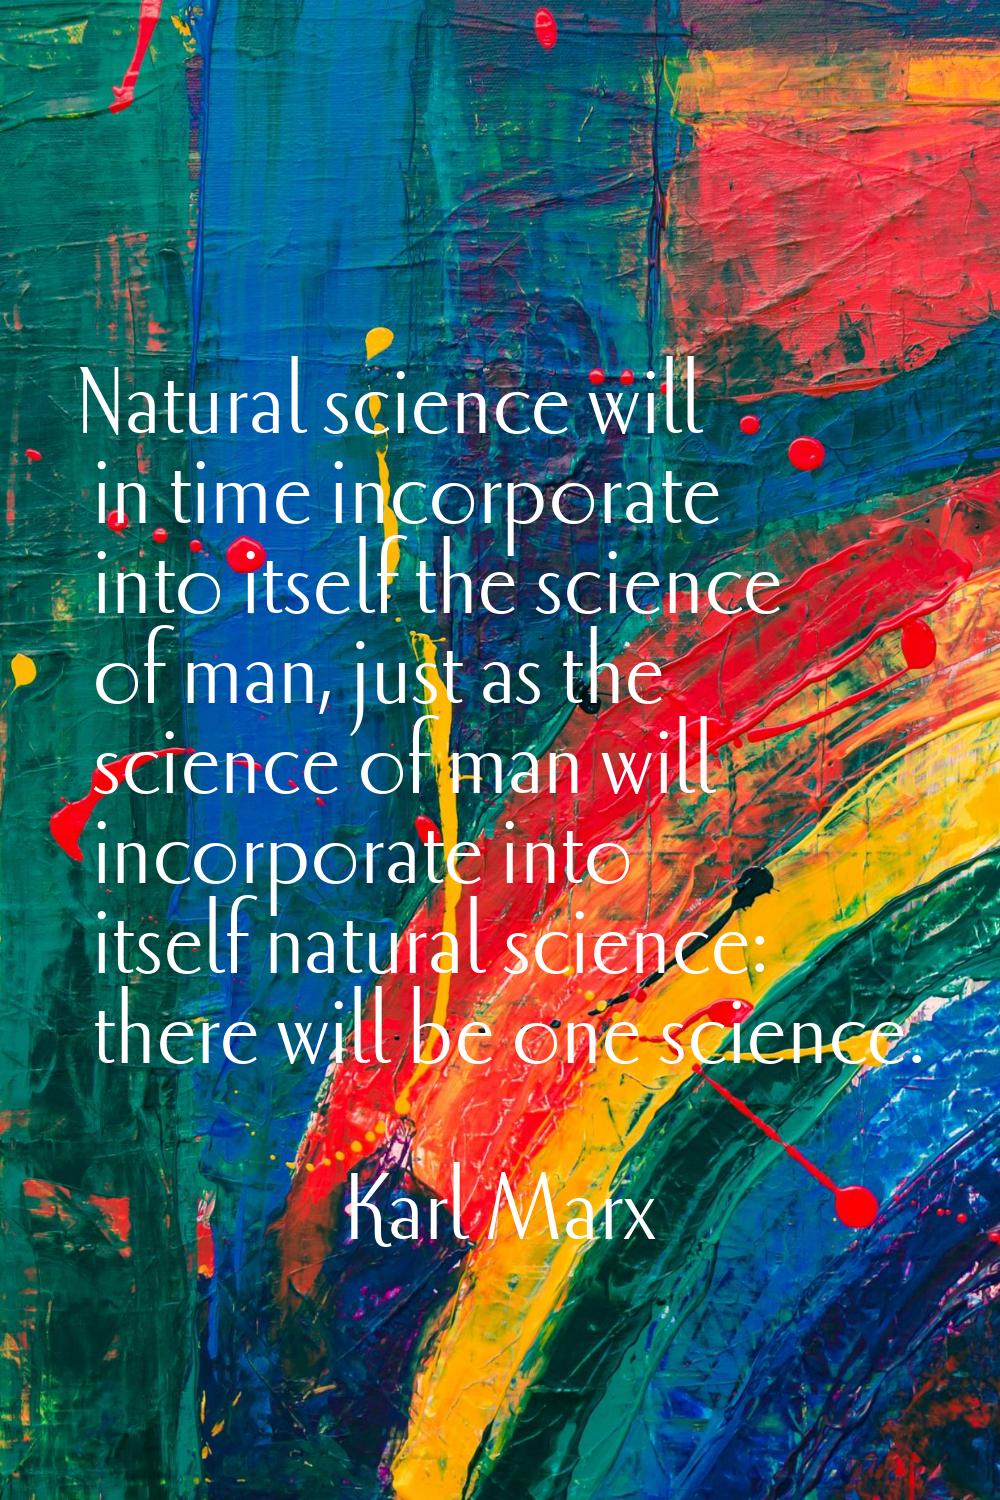 Natural science will in time incorporate into itself the science of man, just as the science of man